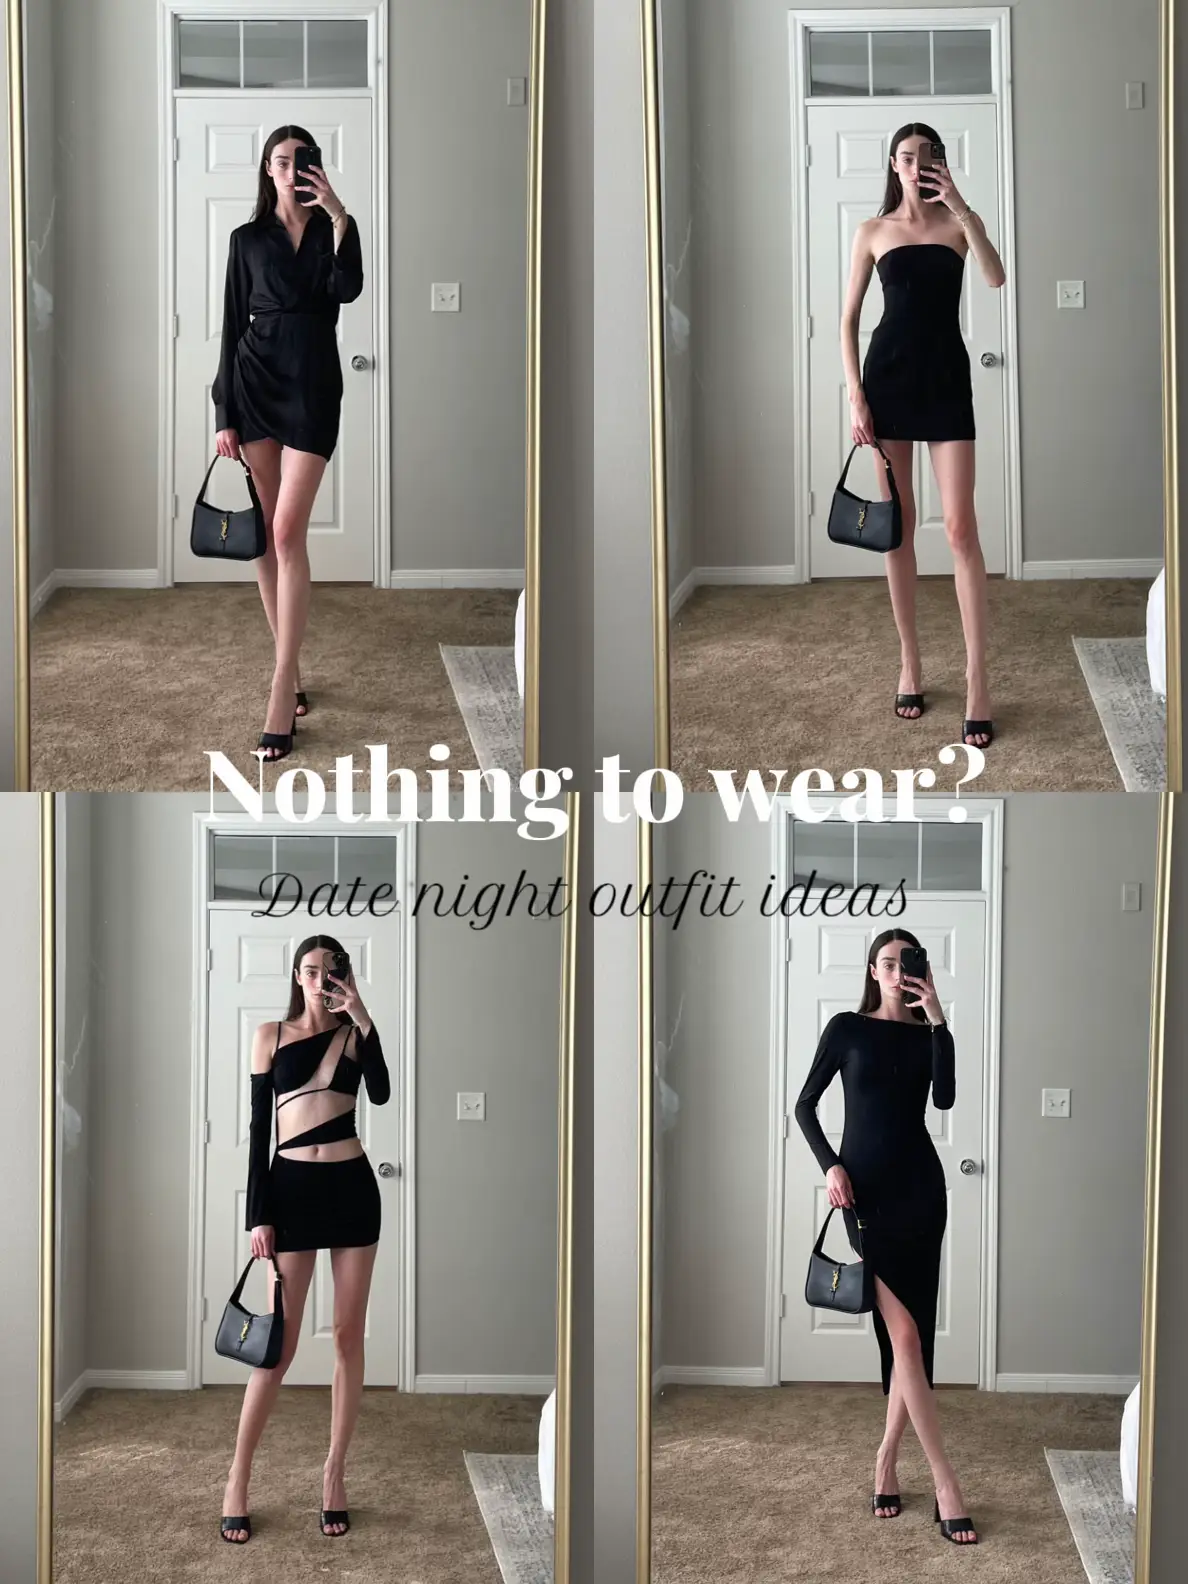 How to never have “nothing to wear”, Gallery posted by Kaitlyn